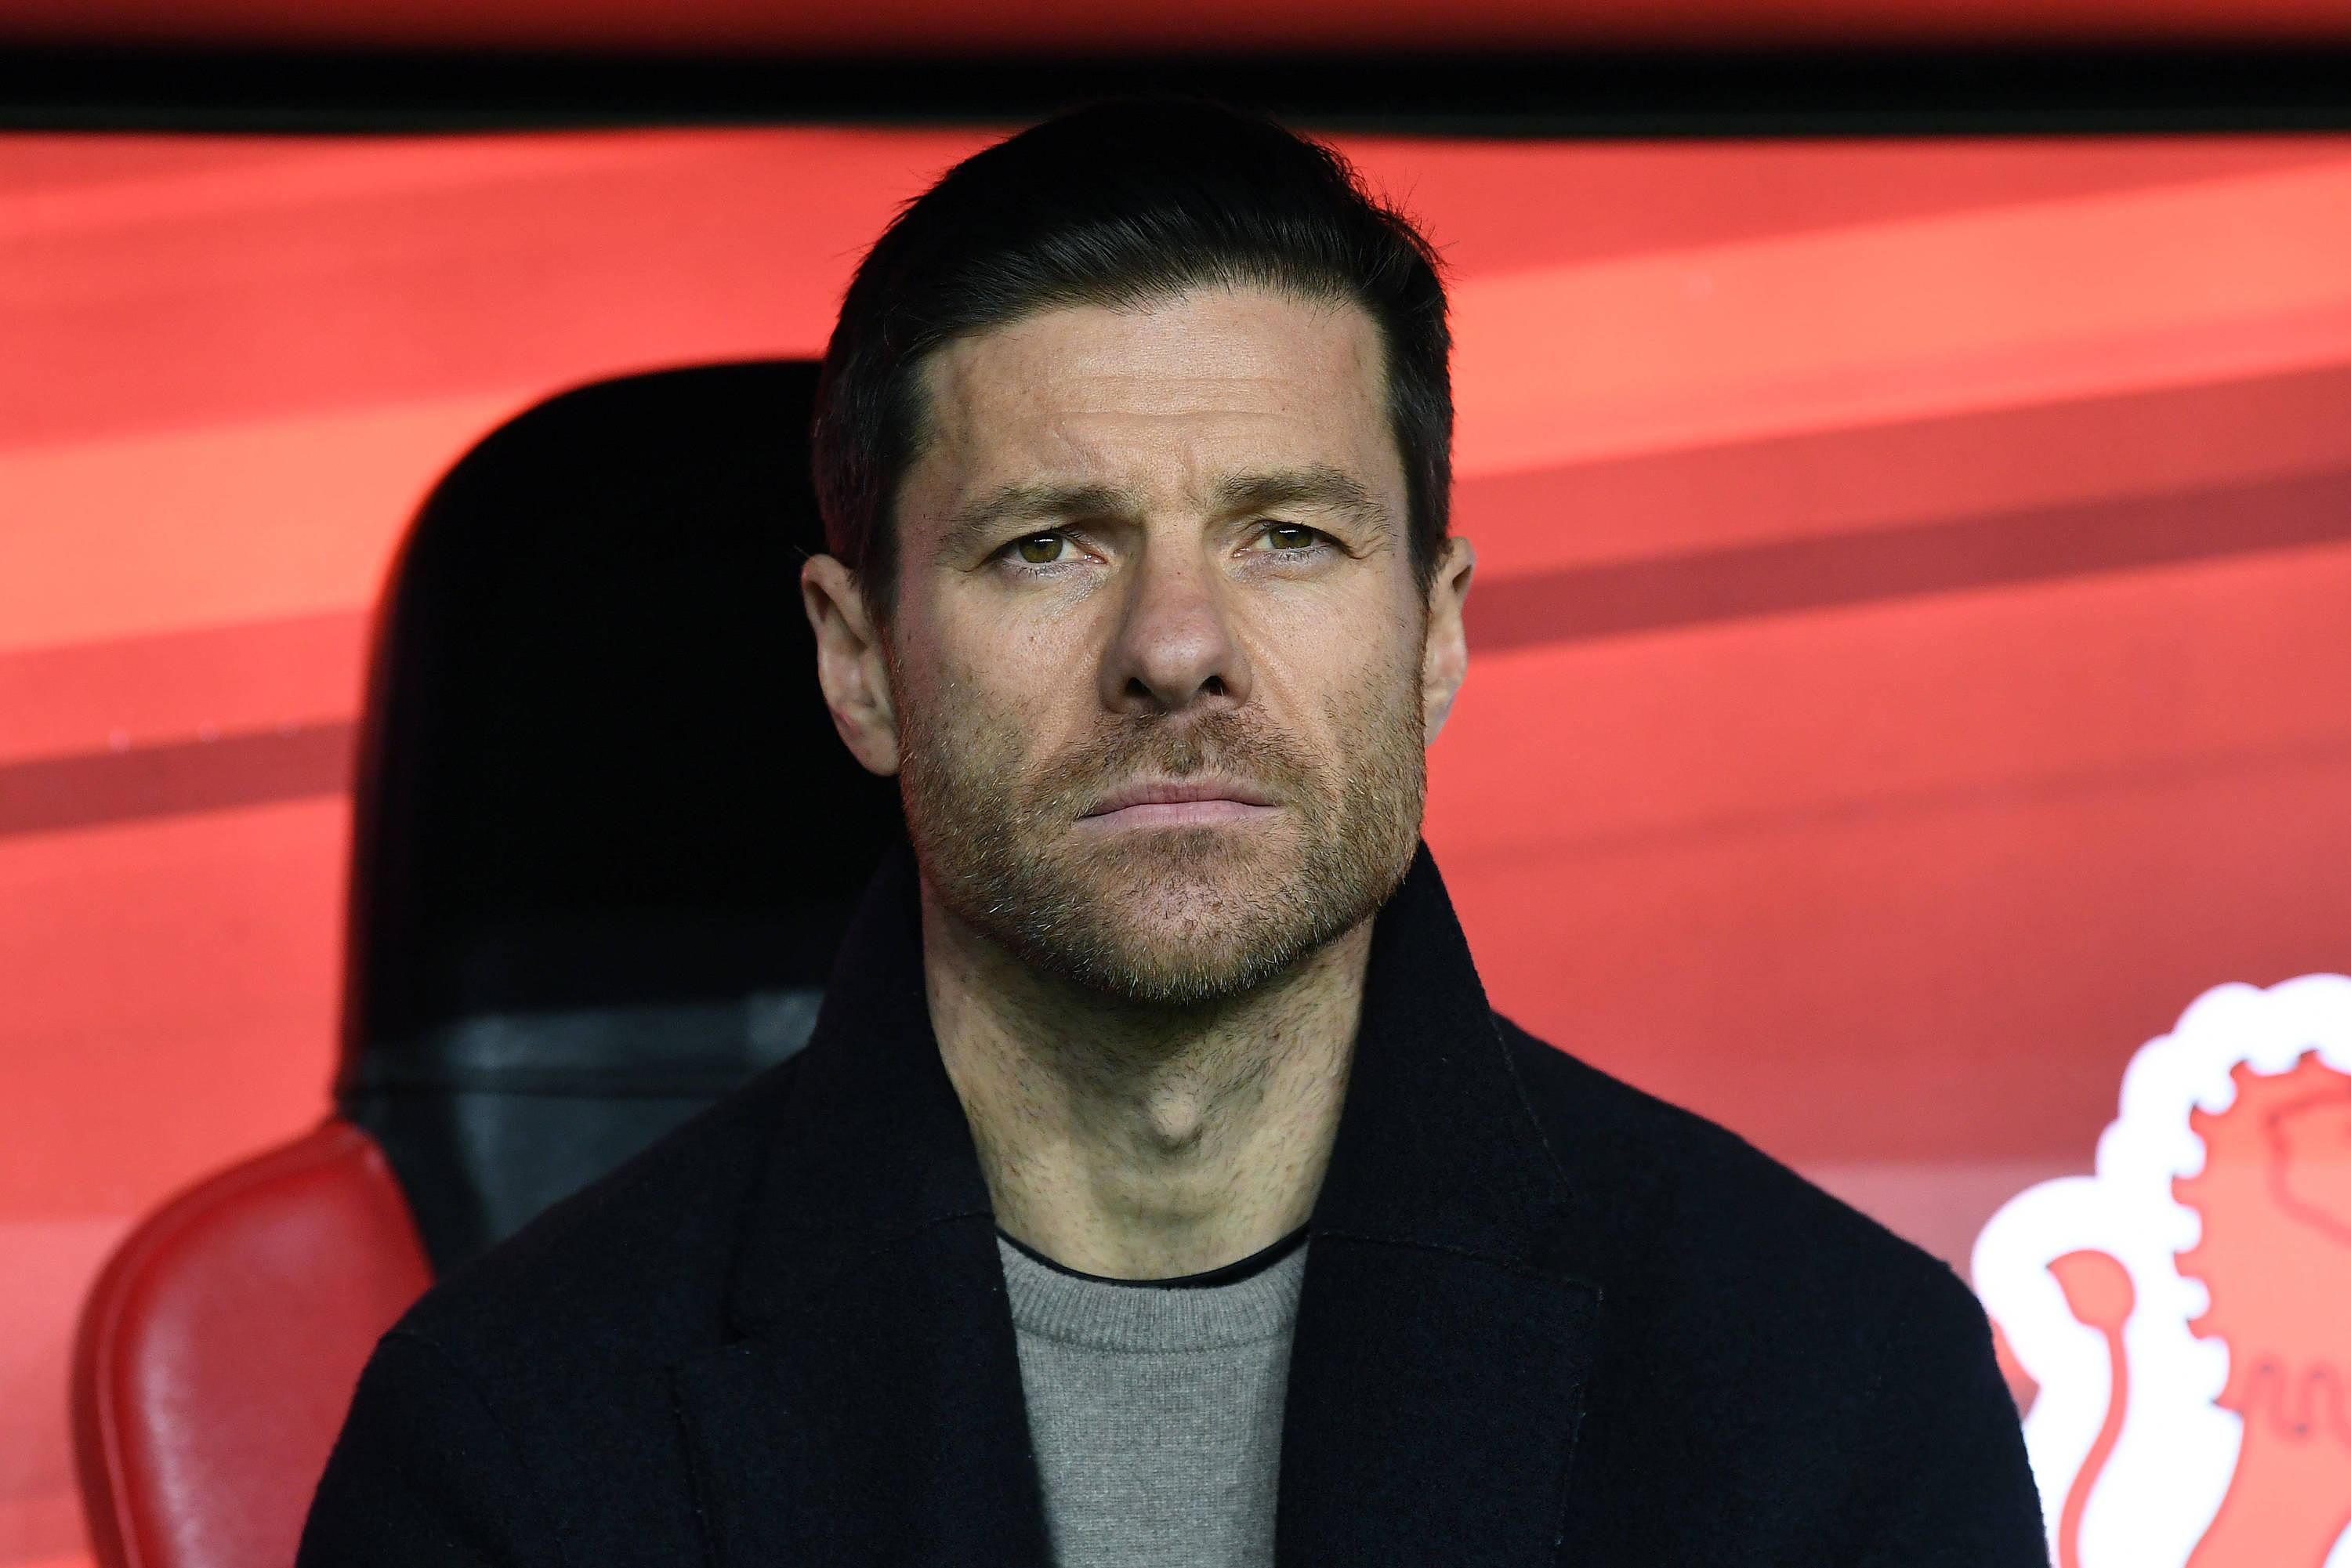 Football: in Thailand, a fake Xabi Alonso demands money online to go to Liverpool